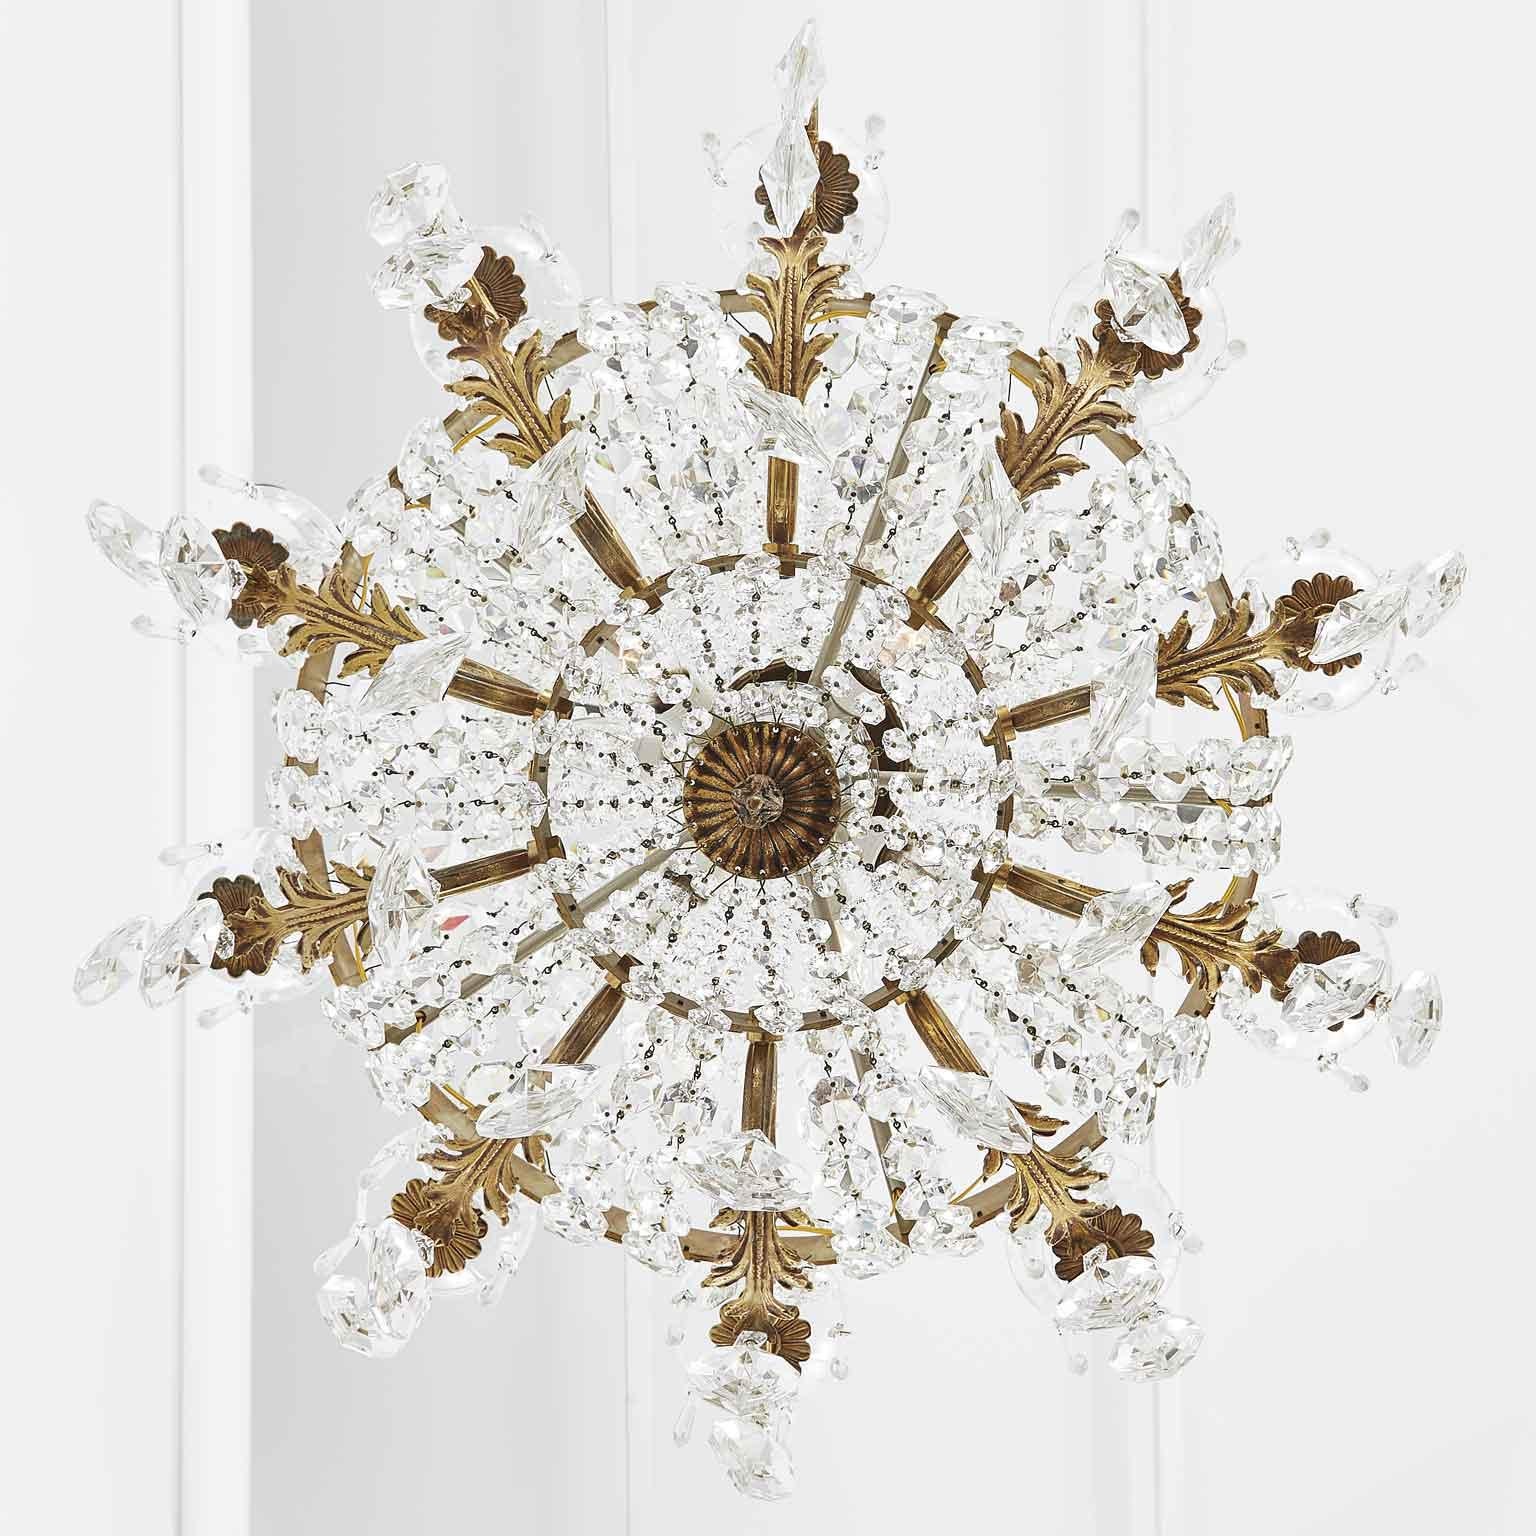 Cast 20th Century Italian Neoclassical Style Crystal Chandelier Roman Female Figures For Sale